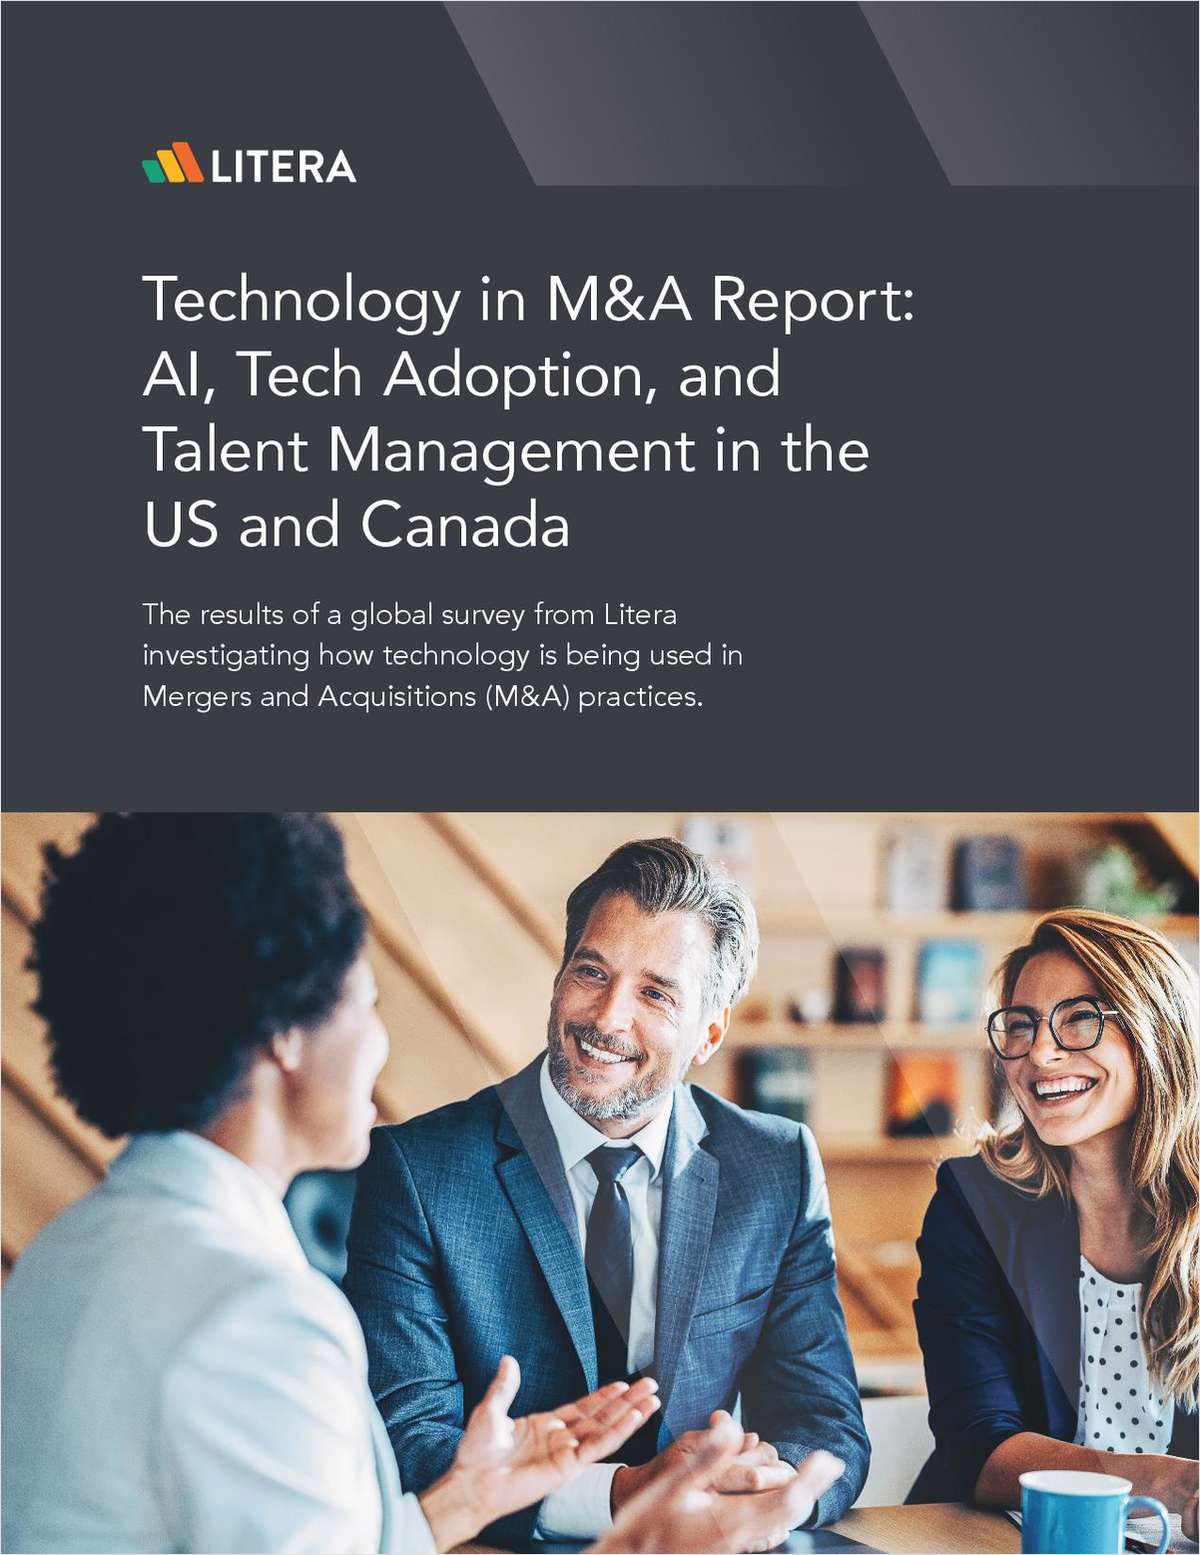 The results of a global survey from Litera investigating how technology is being used in Mergers and Acquisitions (M&A) practices. Download now to explore the full report.